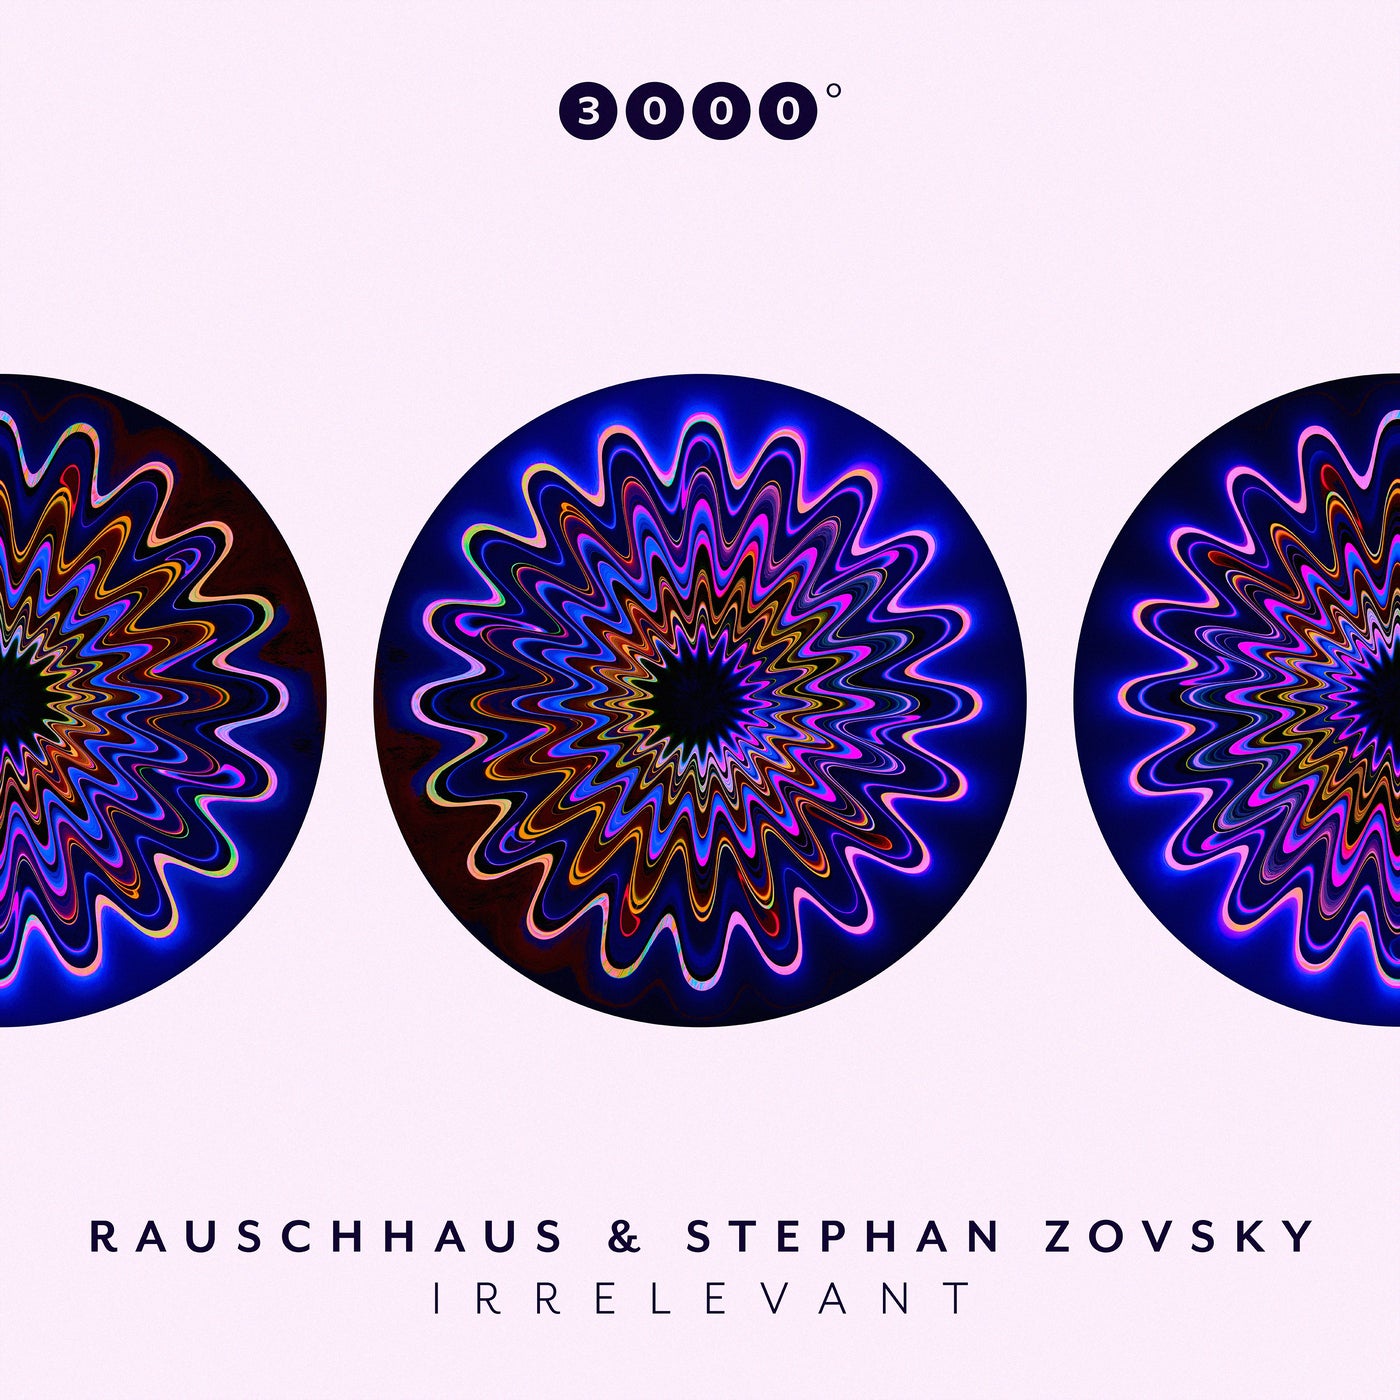 image cover: Rauschhaus, Stephan Zovsky - Irrelevant on 3000 Grad Records